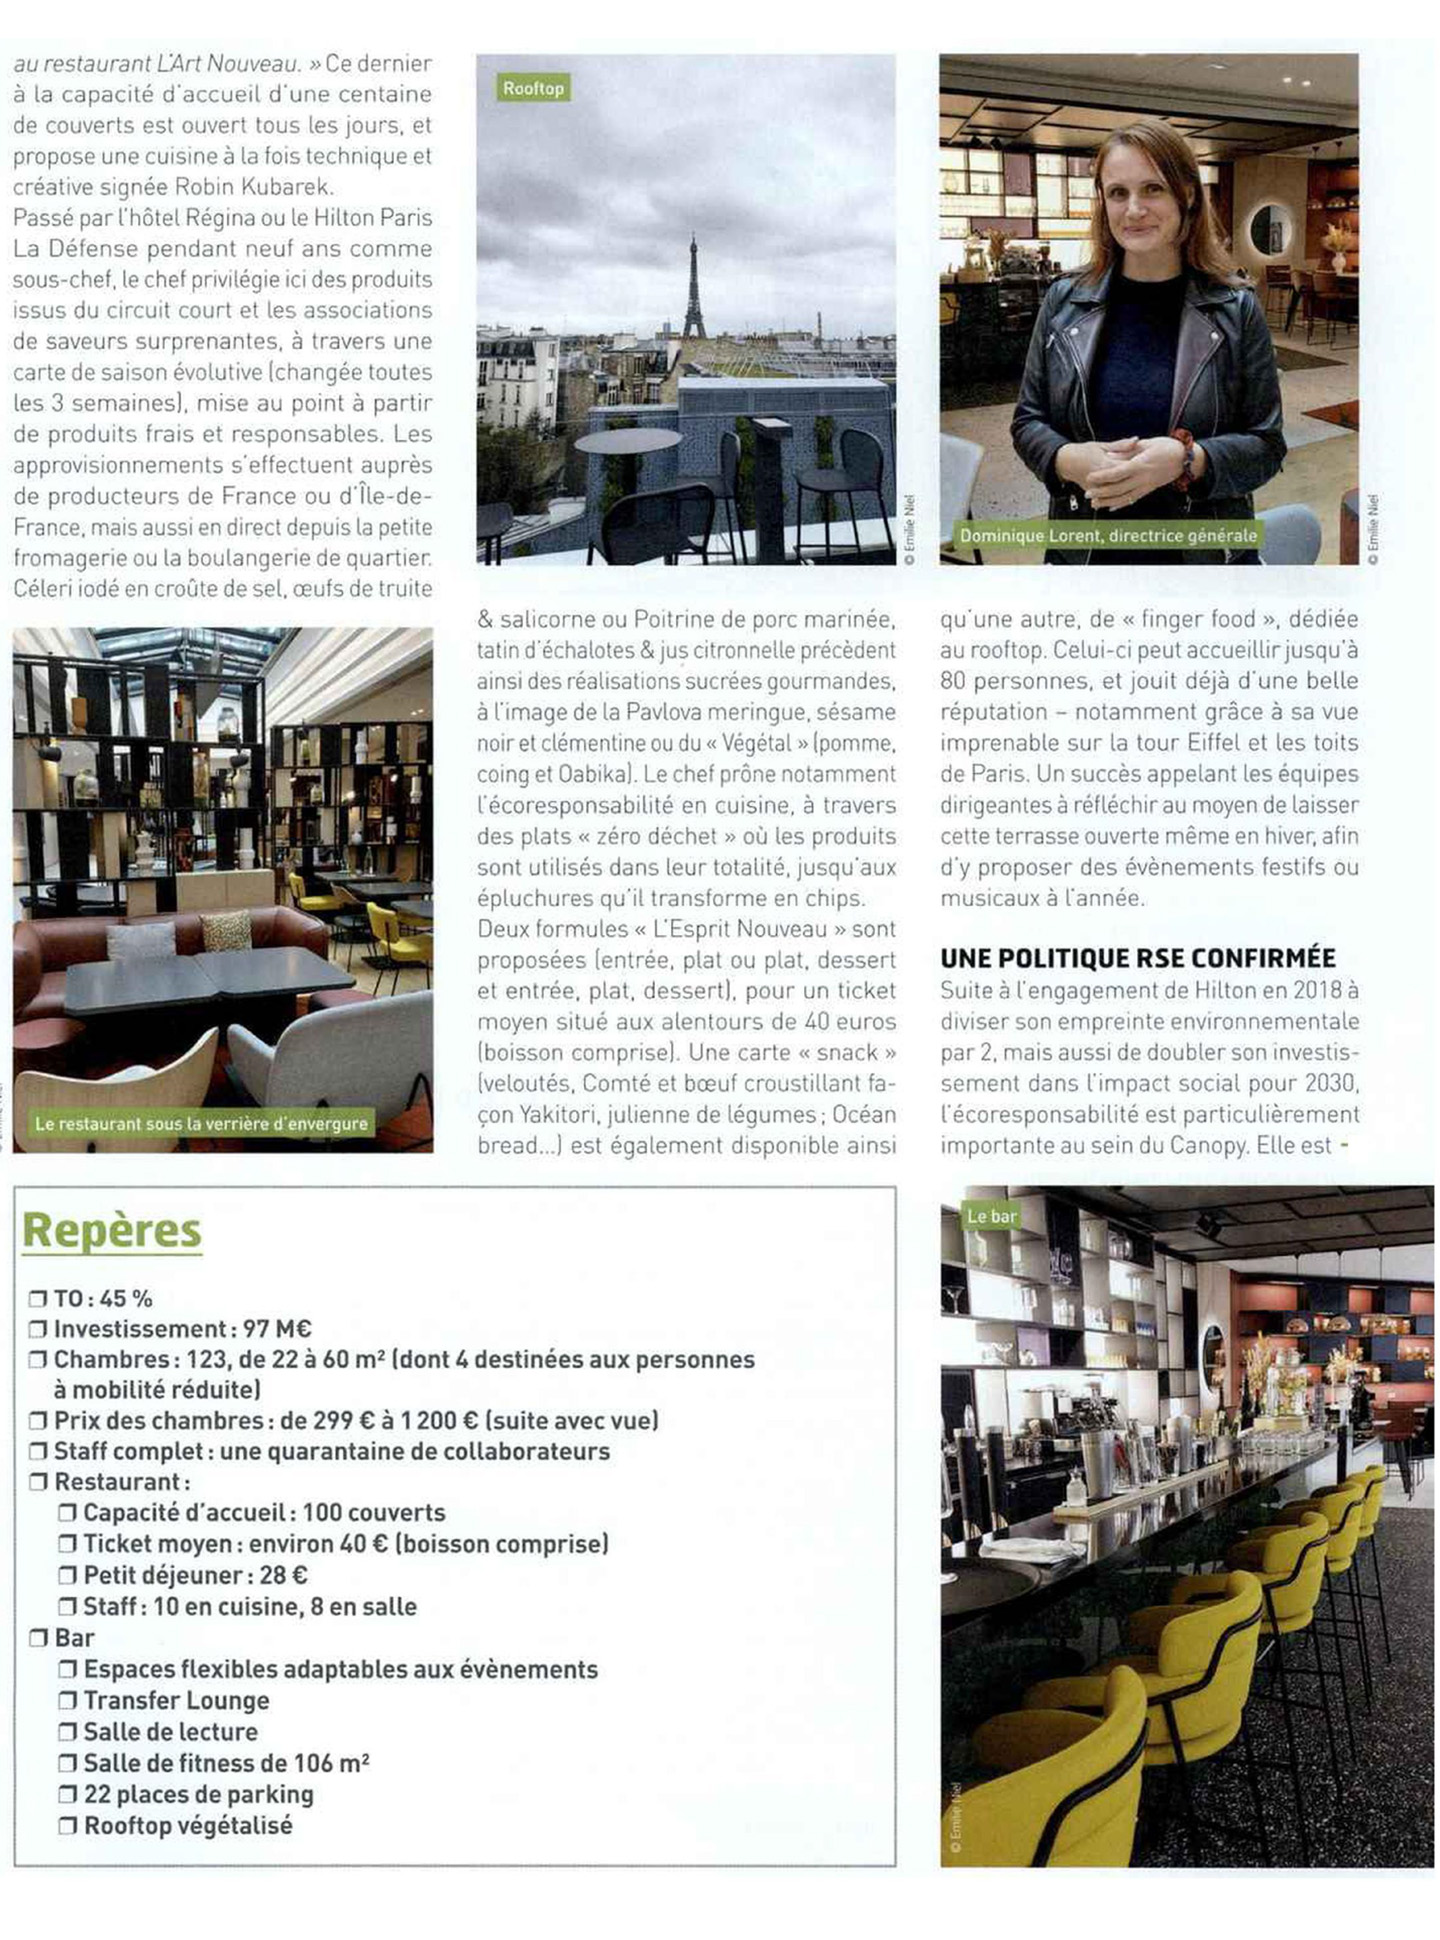 Article on the Canopy by Hilton Paris Trocadero designed by jean-Philippe Nuel studio in industrie hotelliere magazine, new lifestyle hotel, luxury interior design, paris center, french luxury hotel